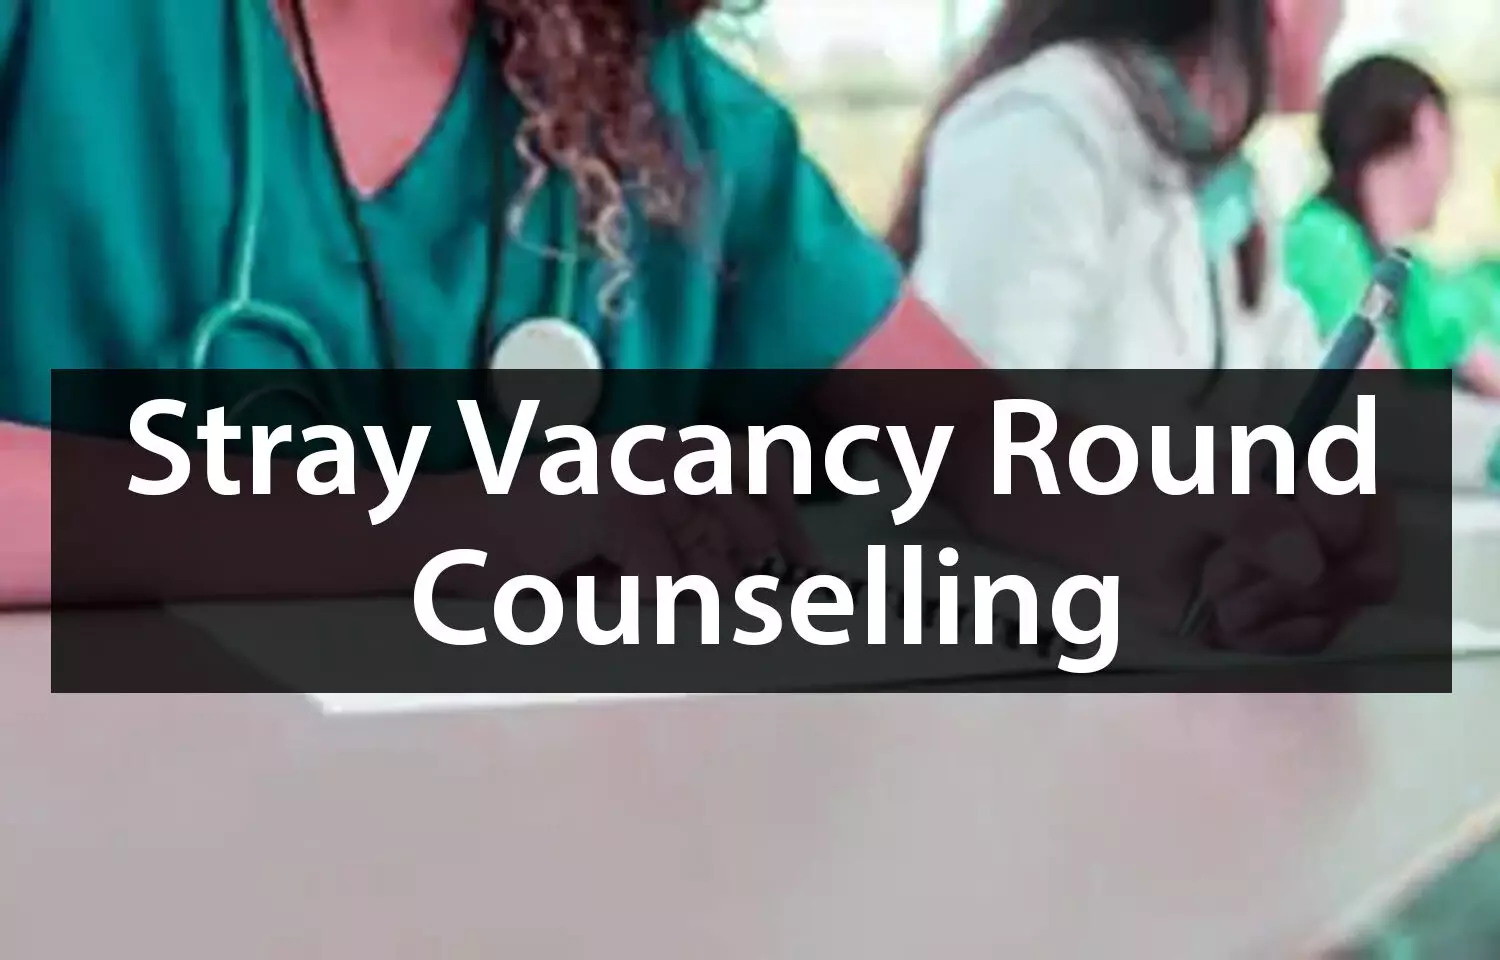 MCC NEET MDS Counselling 2021, Extended Stray Vacancy Round Schedule released, Details